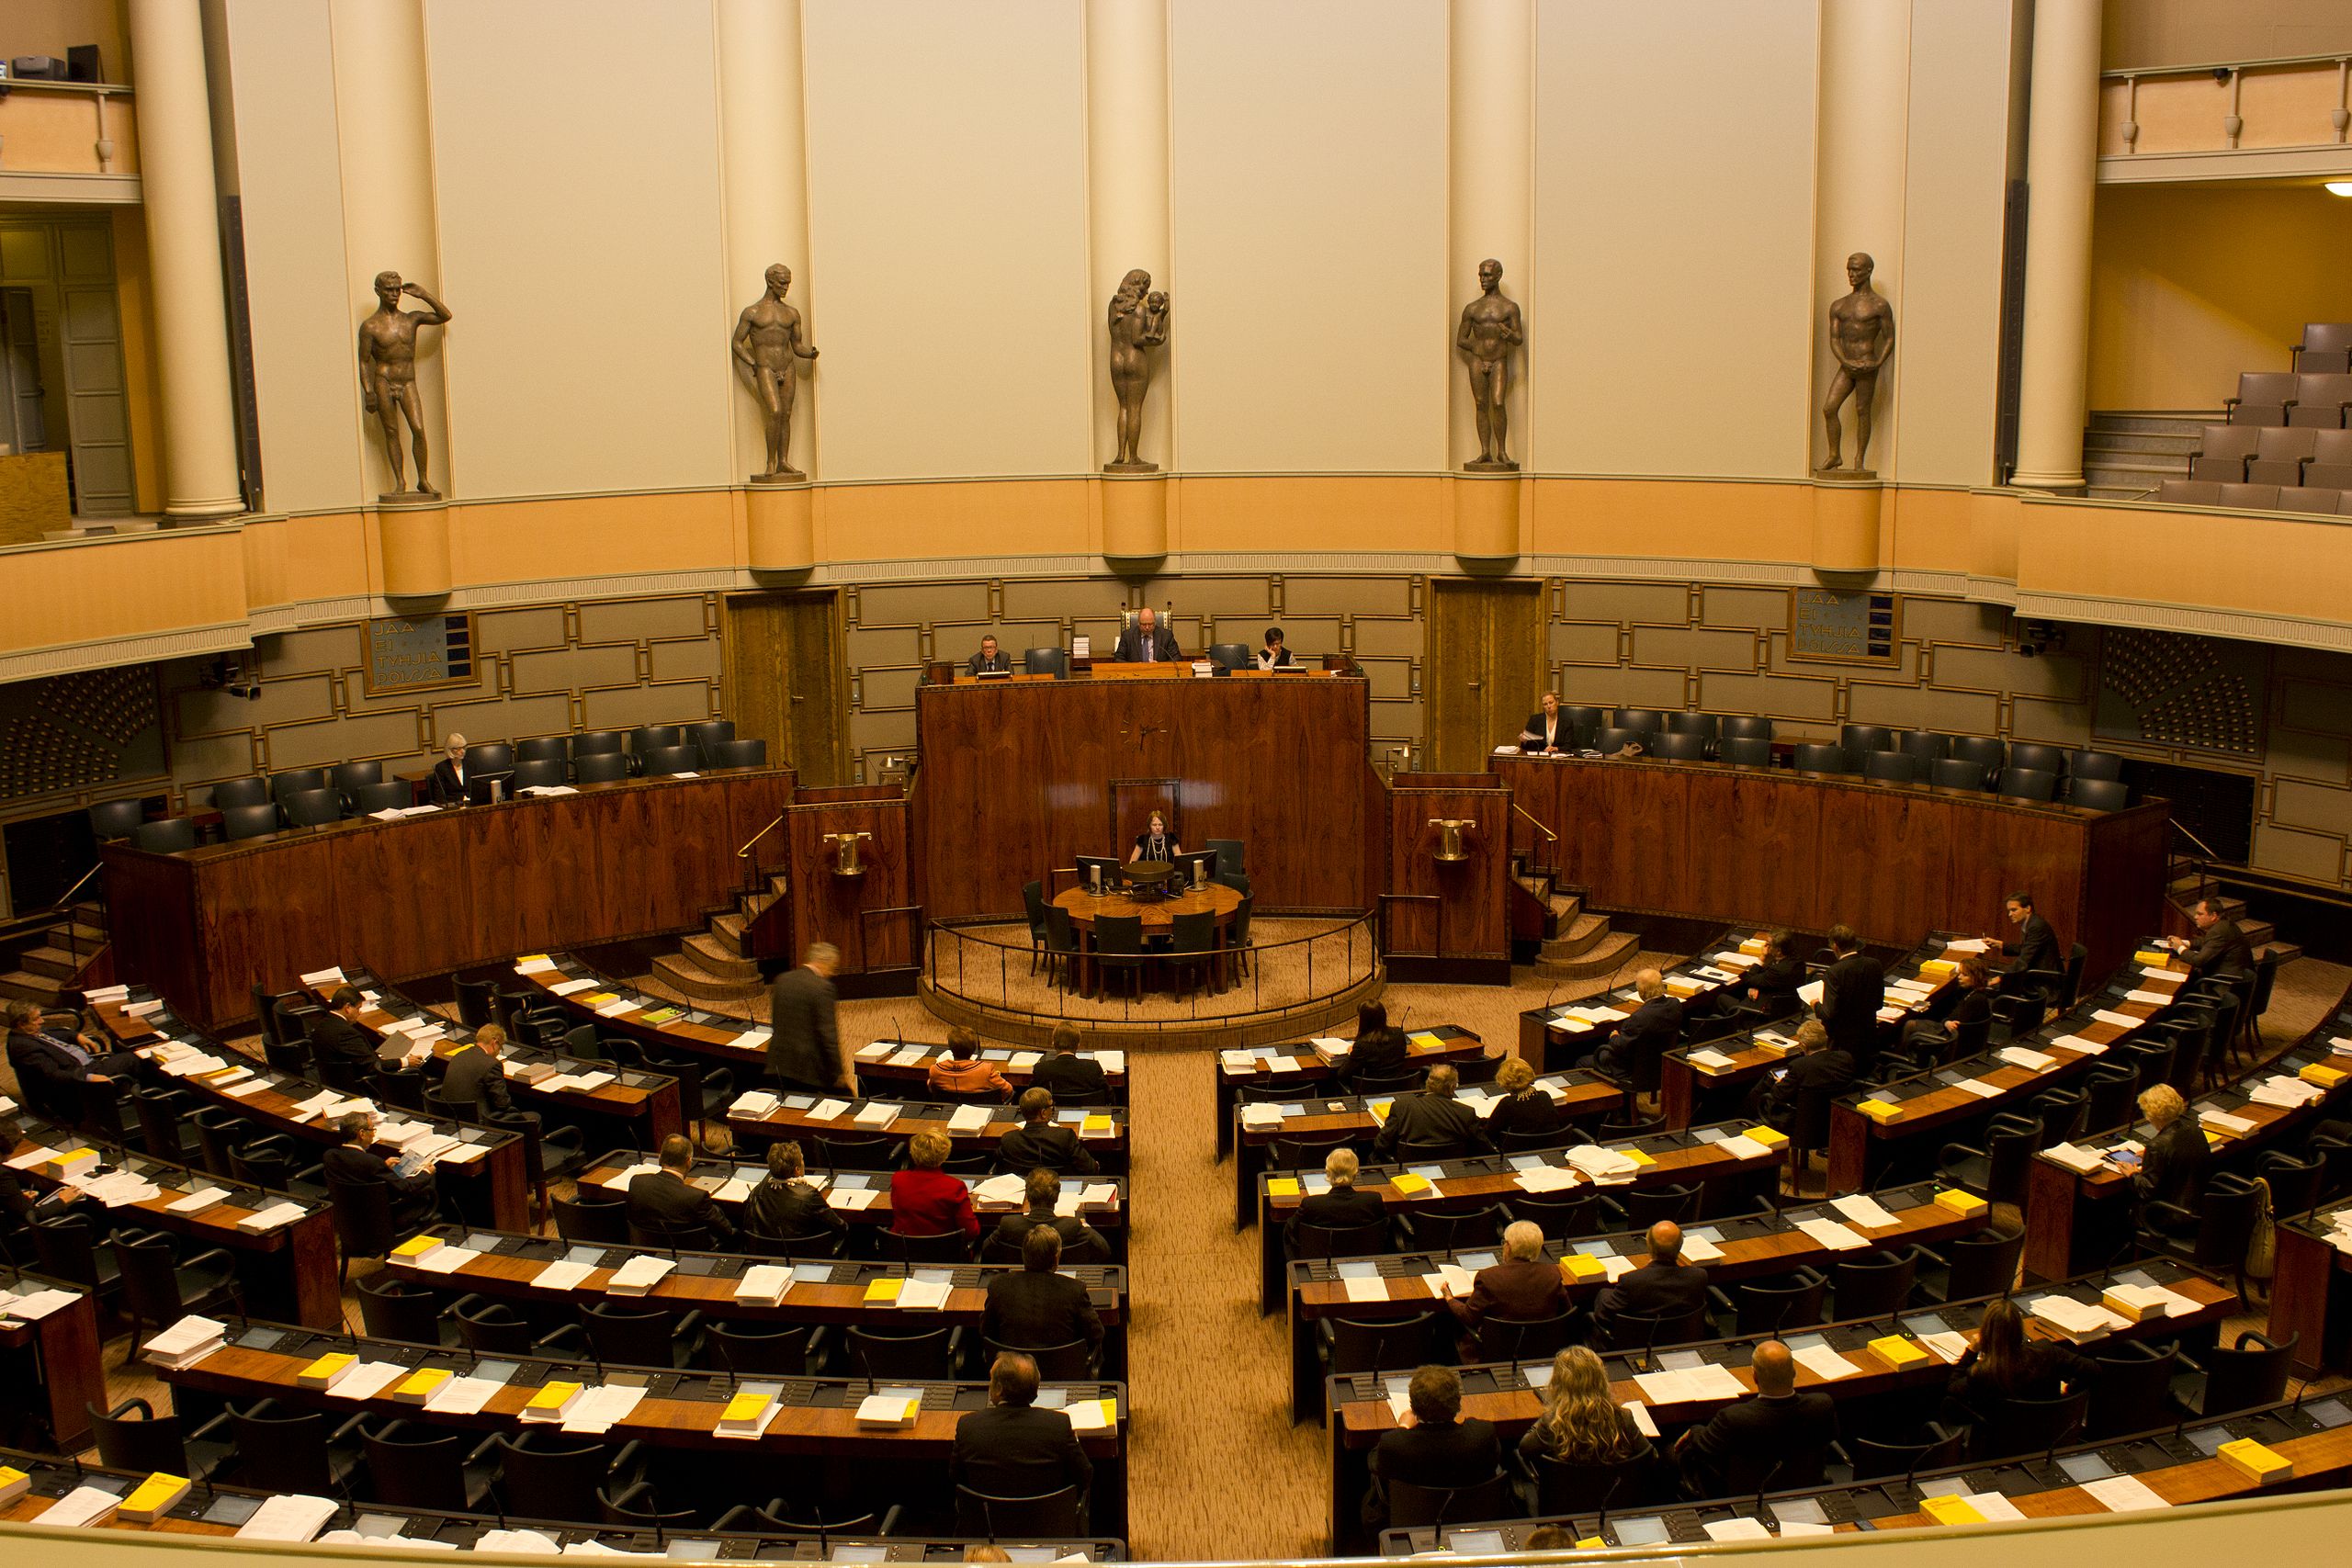 Parliament of Finland where Self ID in Finland is currently being proposed and debated